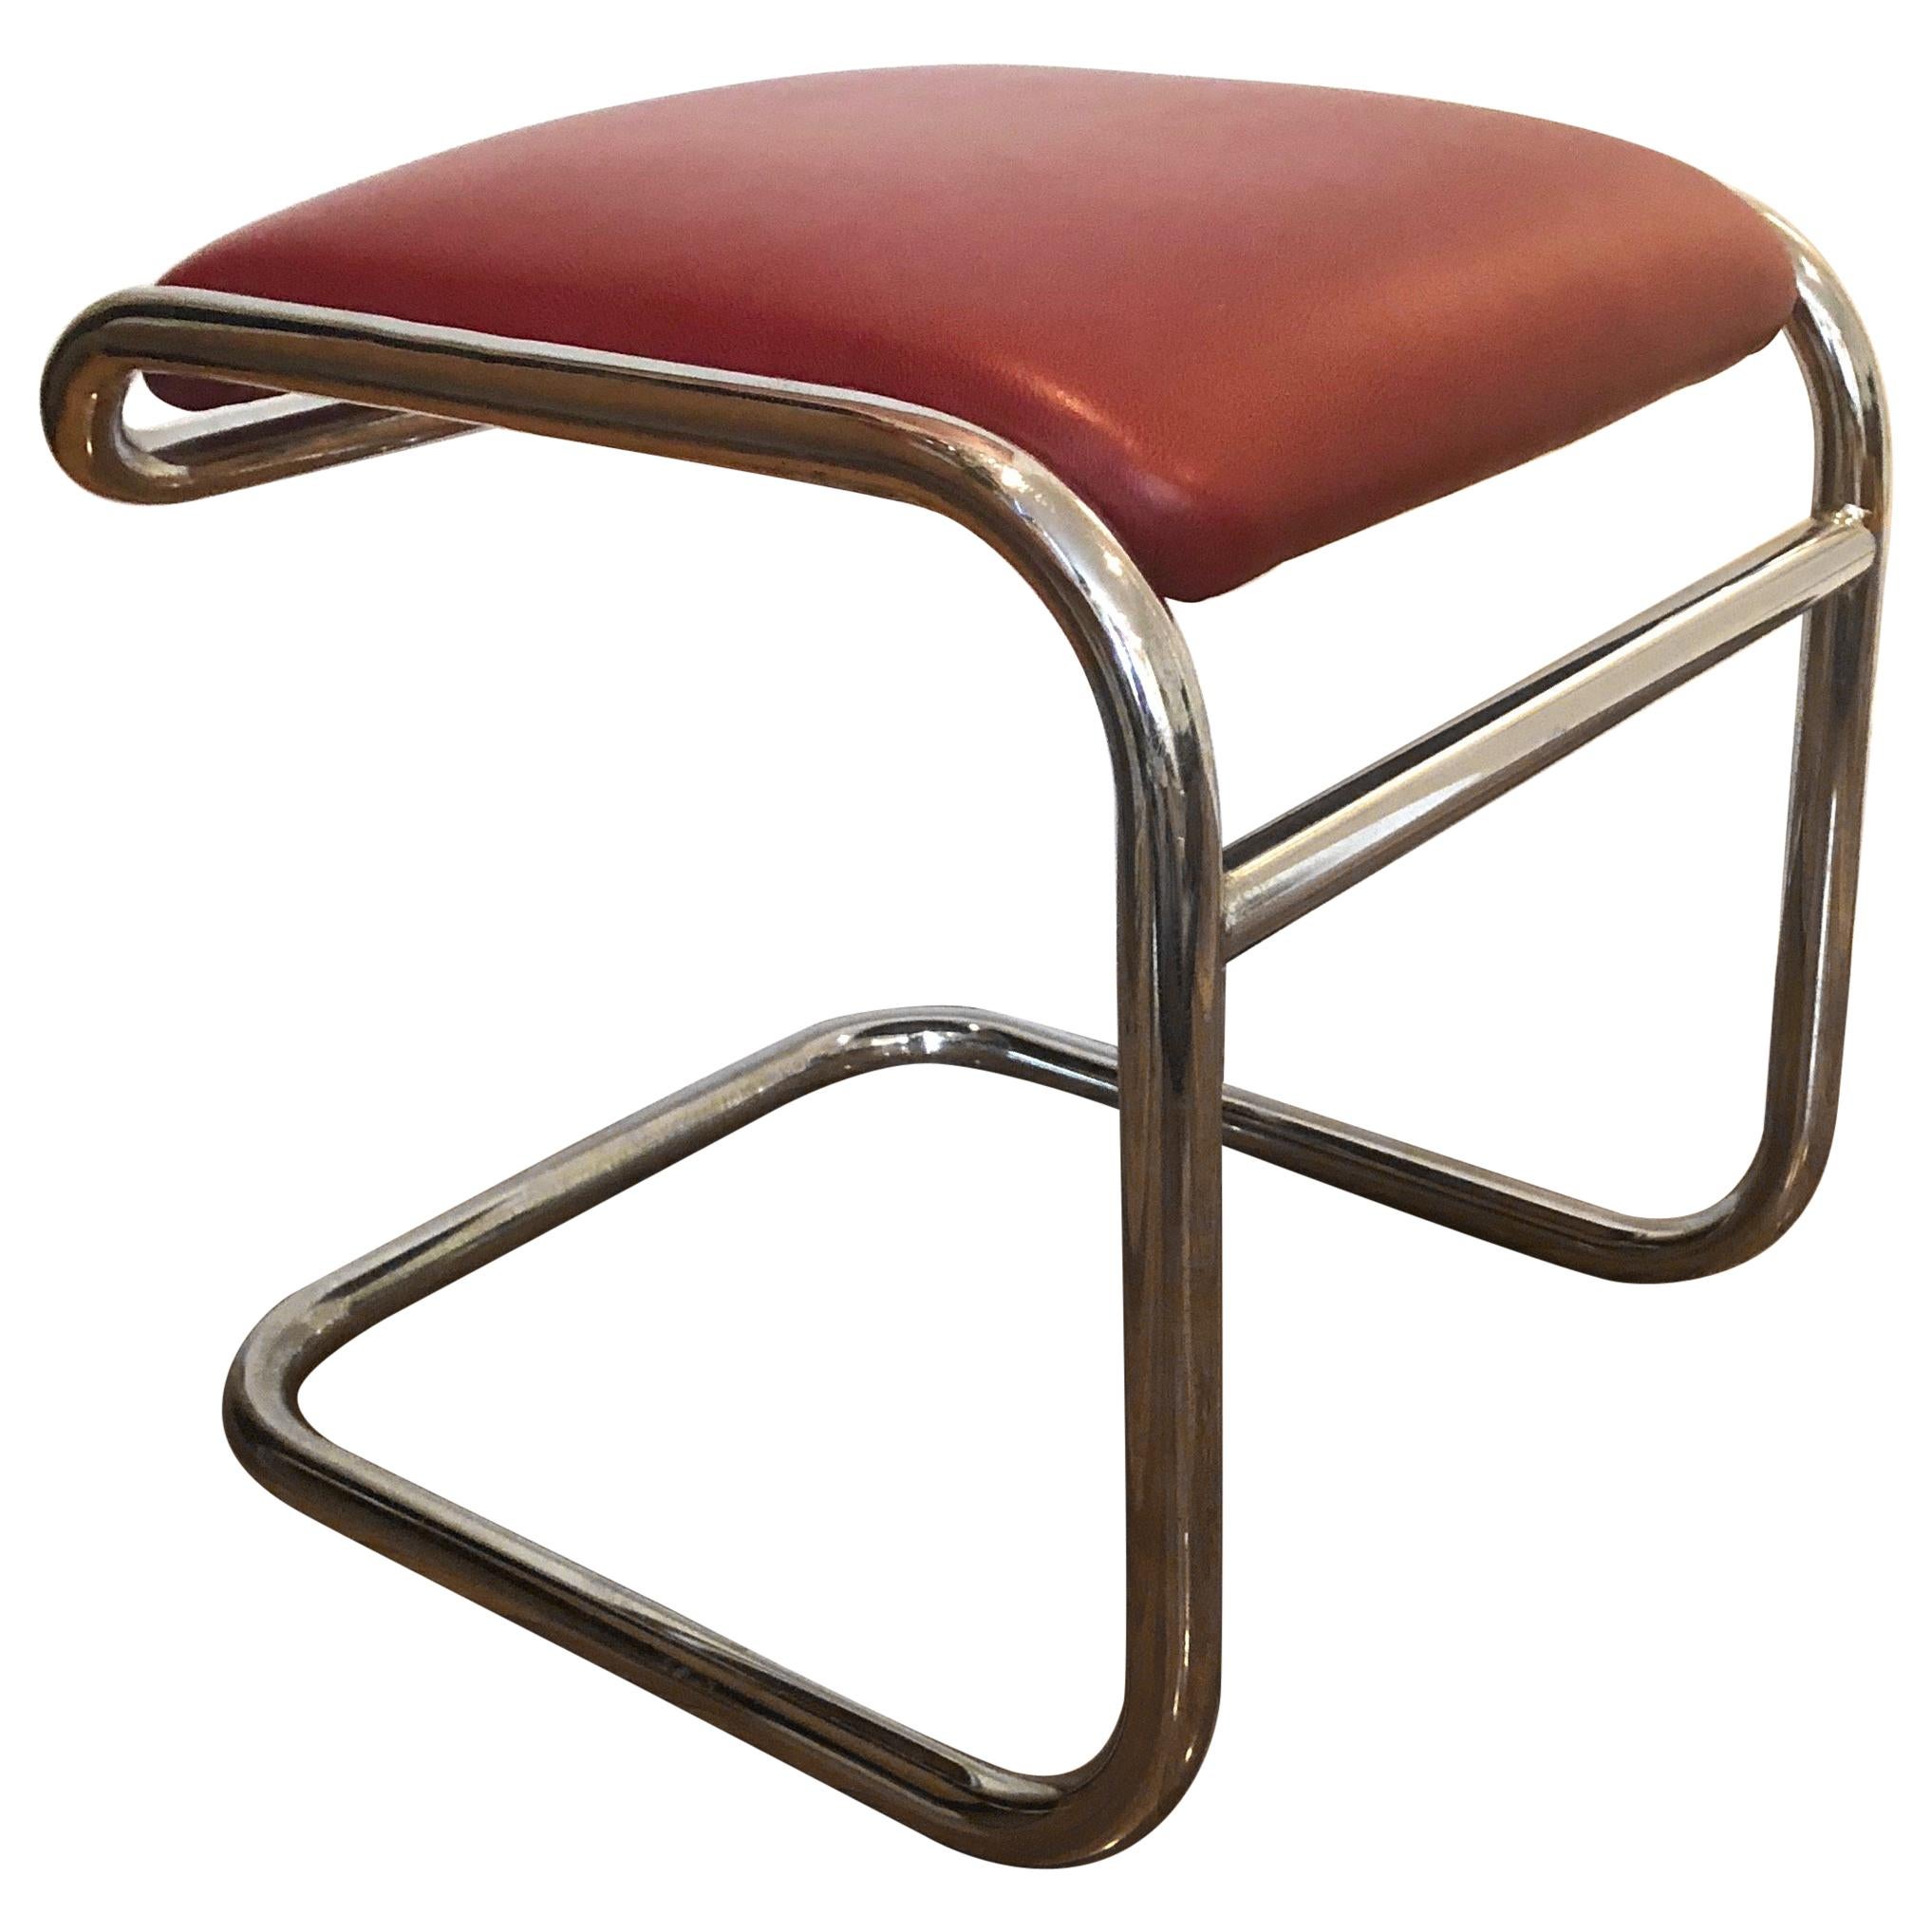 Pair of tubular chromed metal footstools with a horizontal stretcher and red leatherette seats. priced at $1200 for the pair